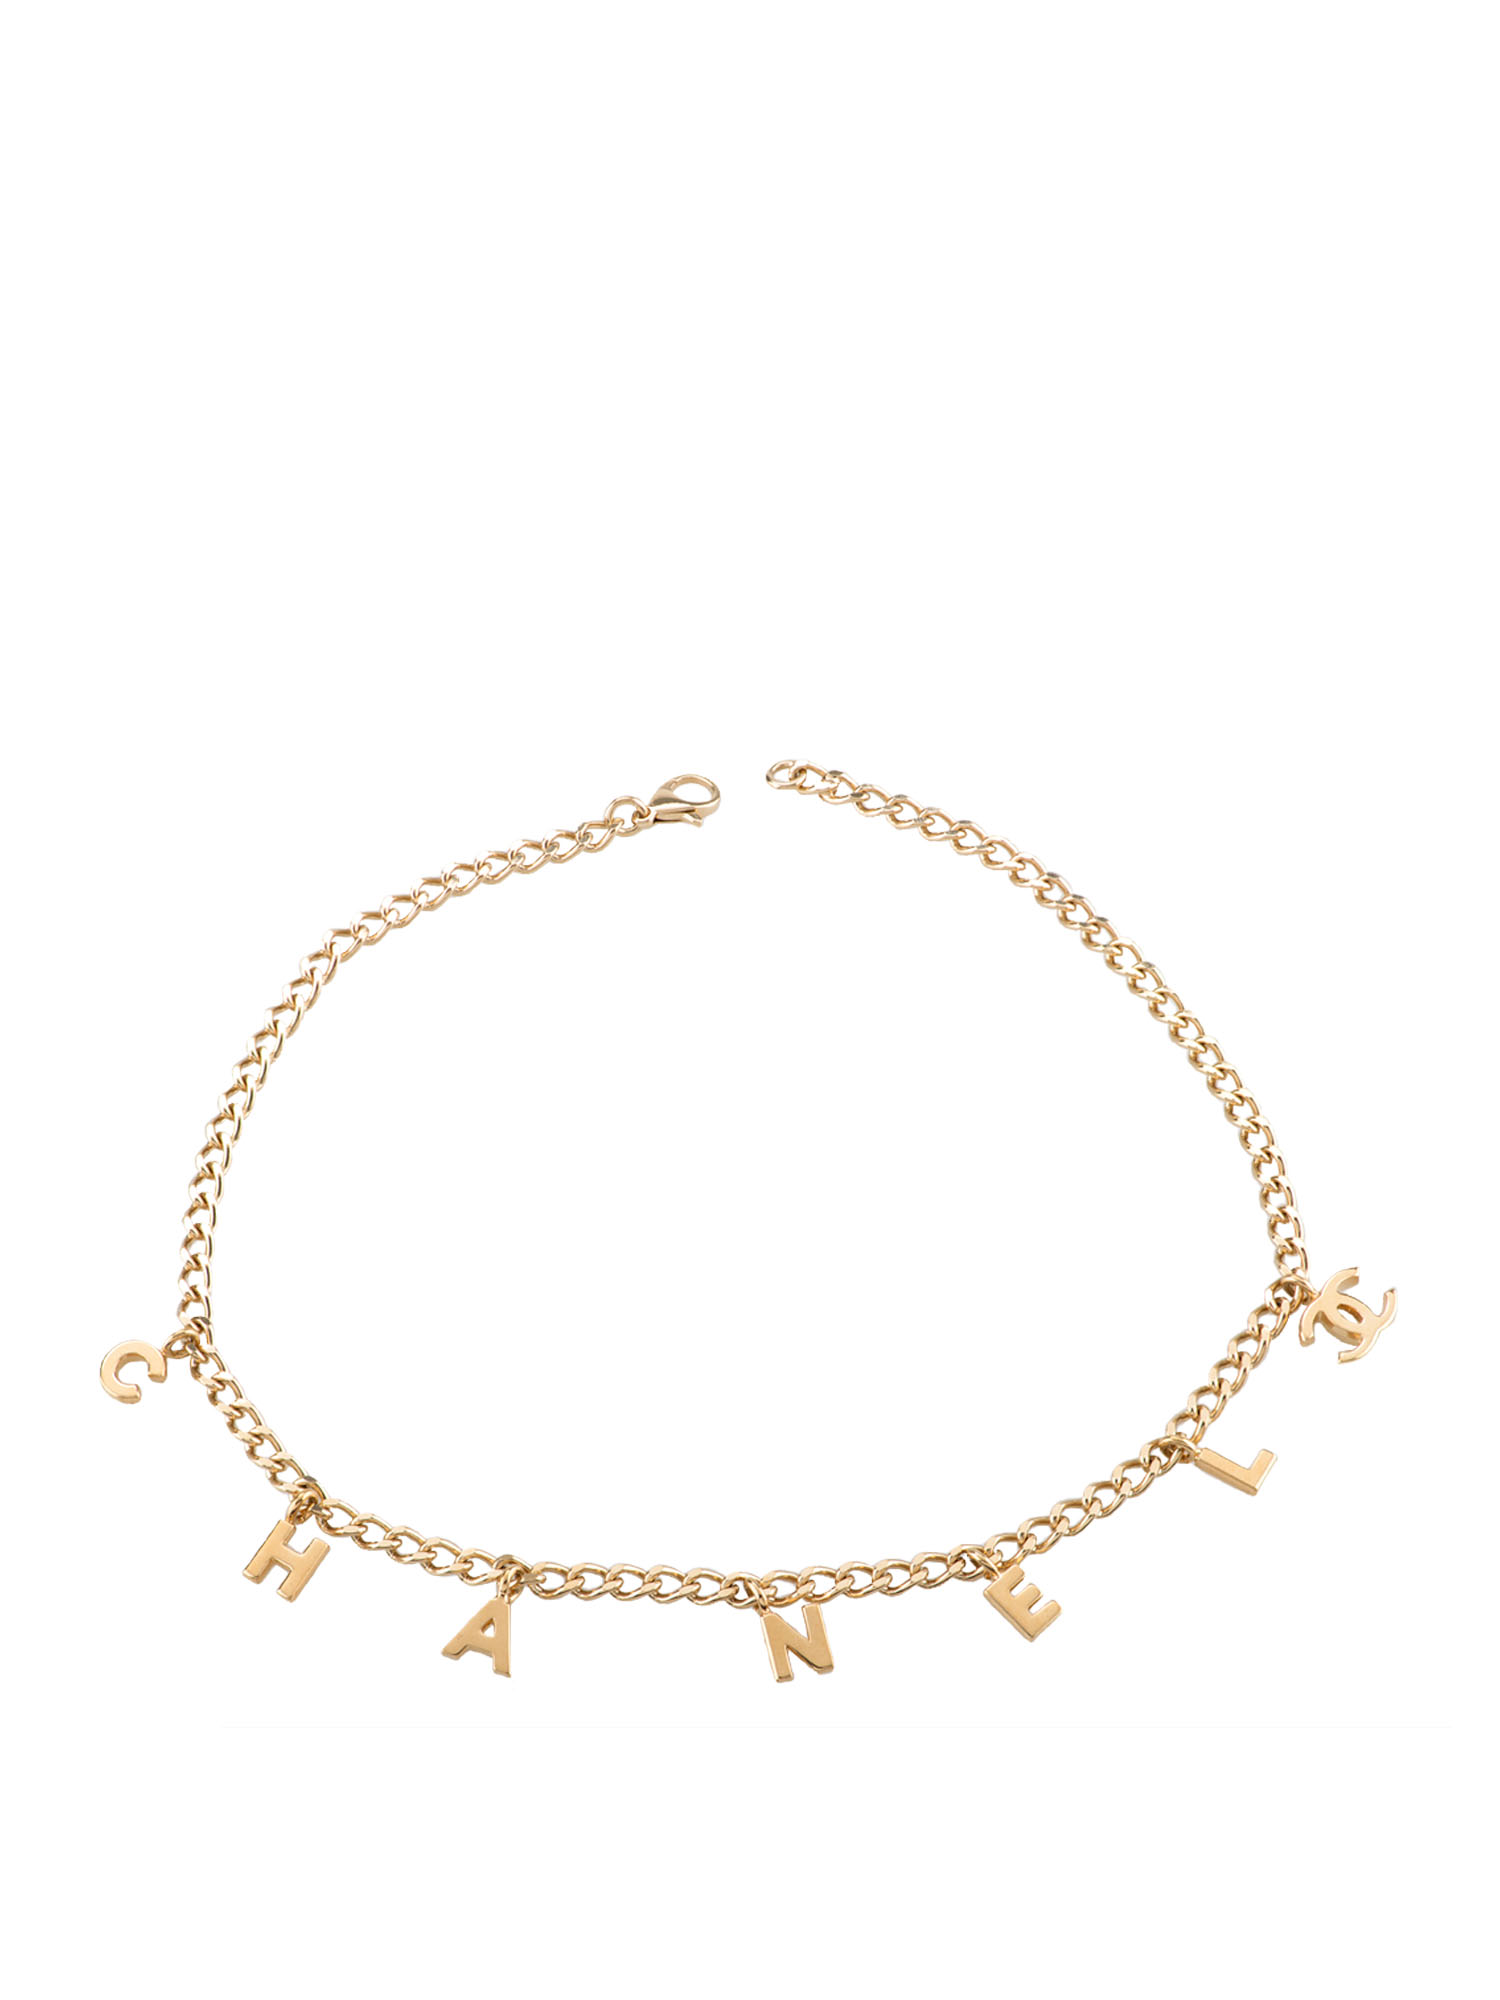 Chanel Letter Charm Necklace in Light Gold